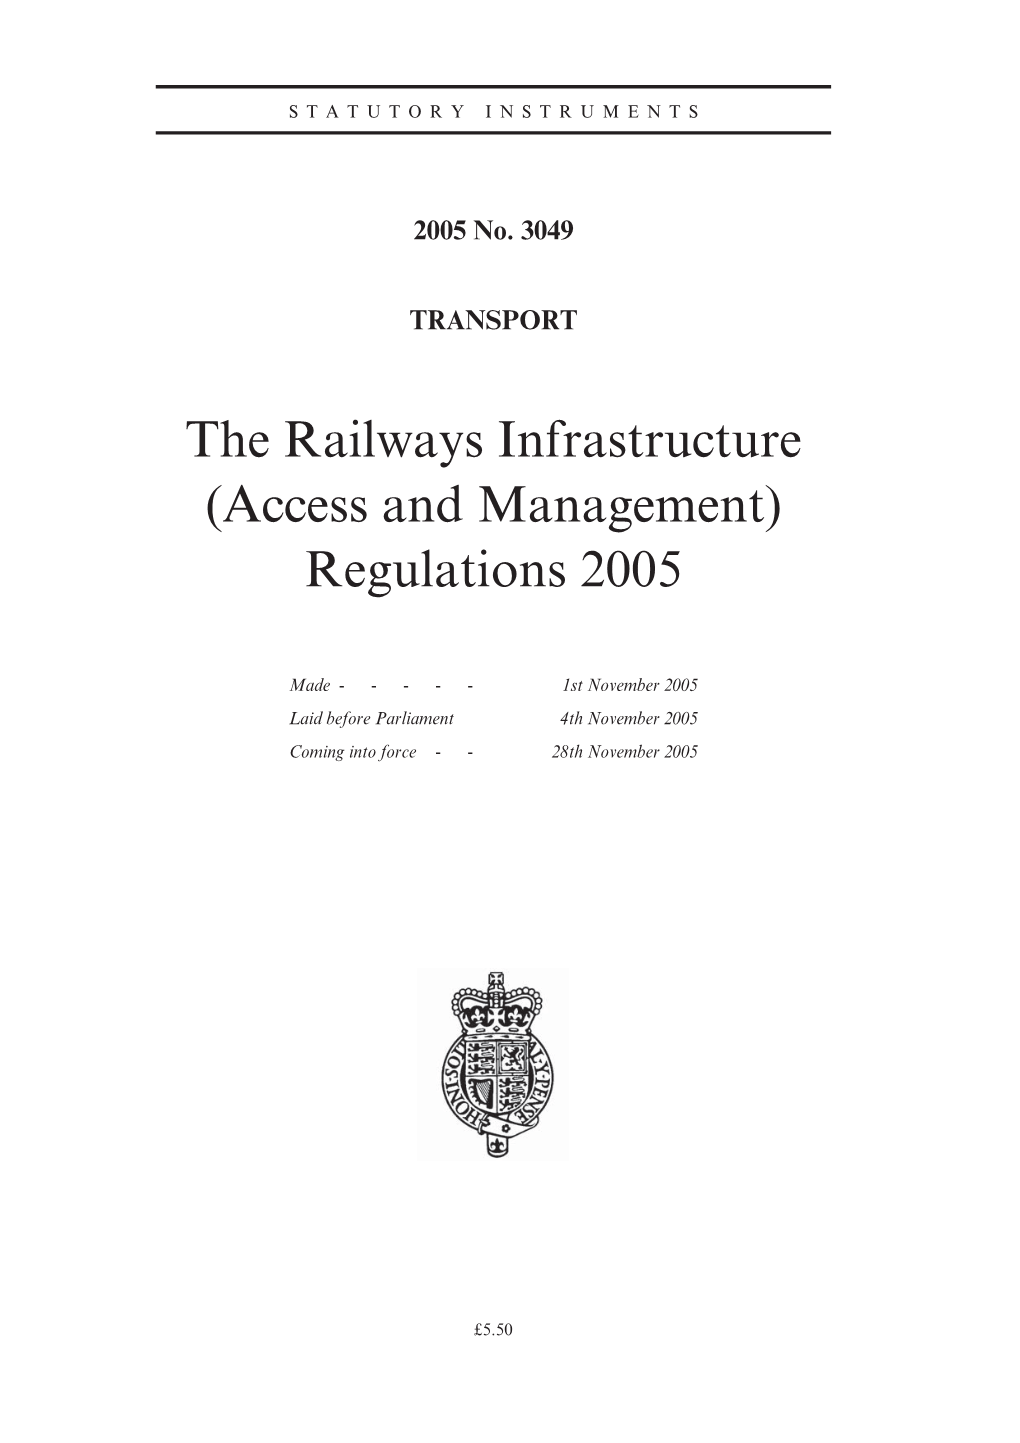 The Railways Infrastructure (Access and Management) Regulations 2005